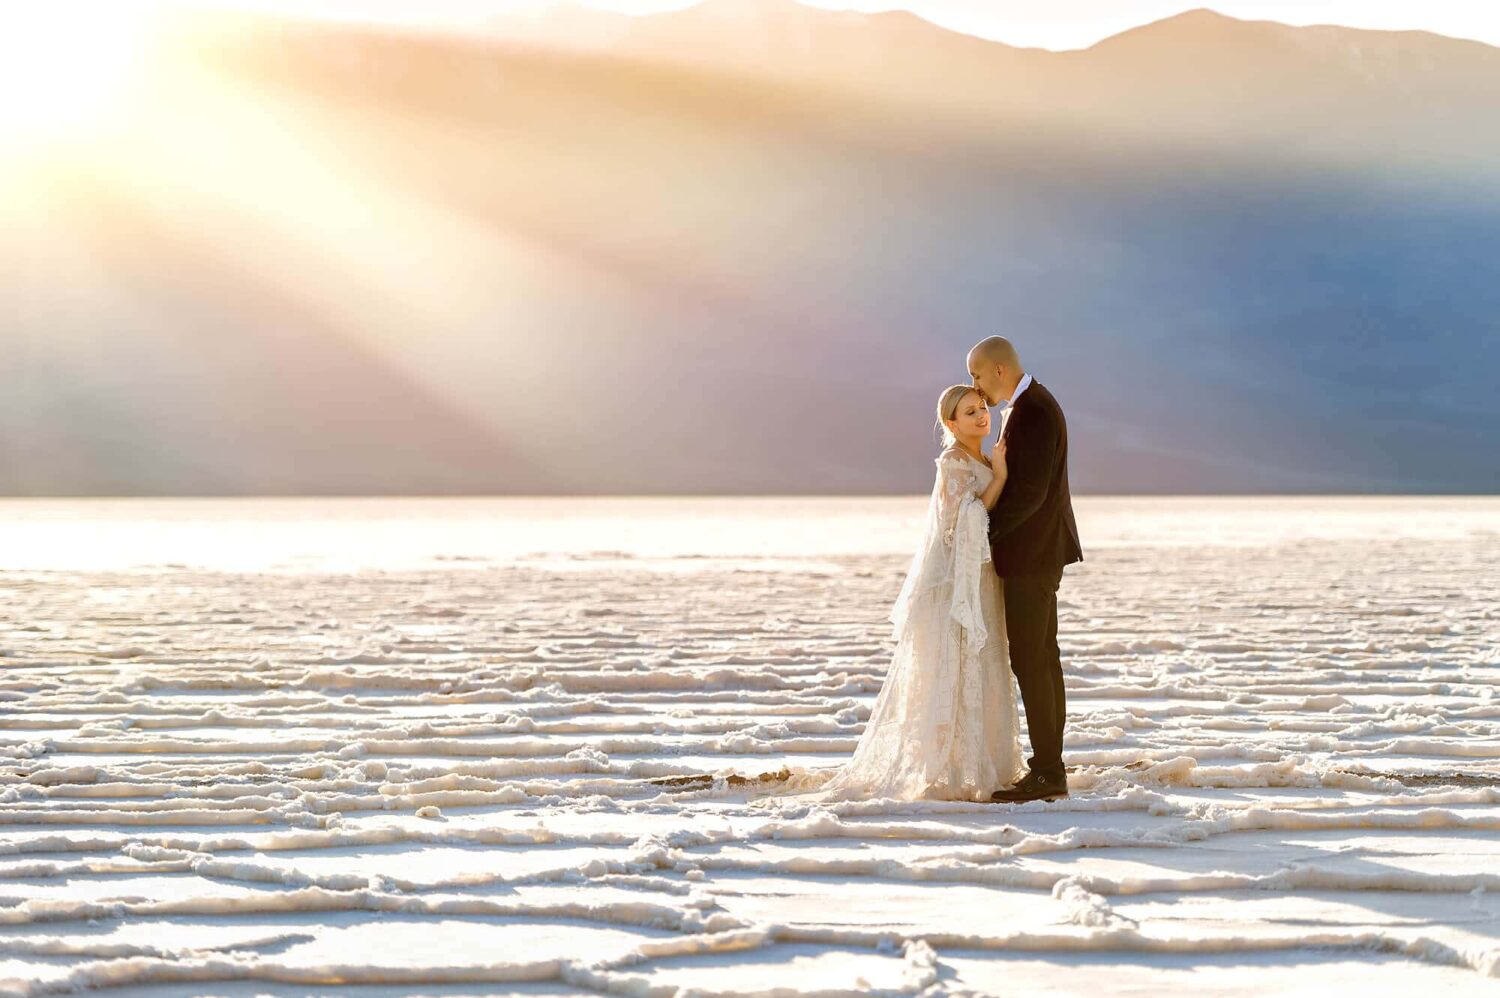 Badwater engagement photo by Eden Bao